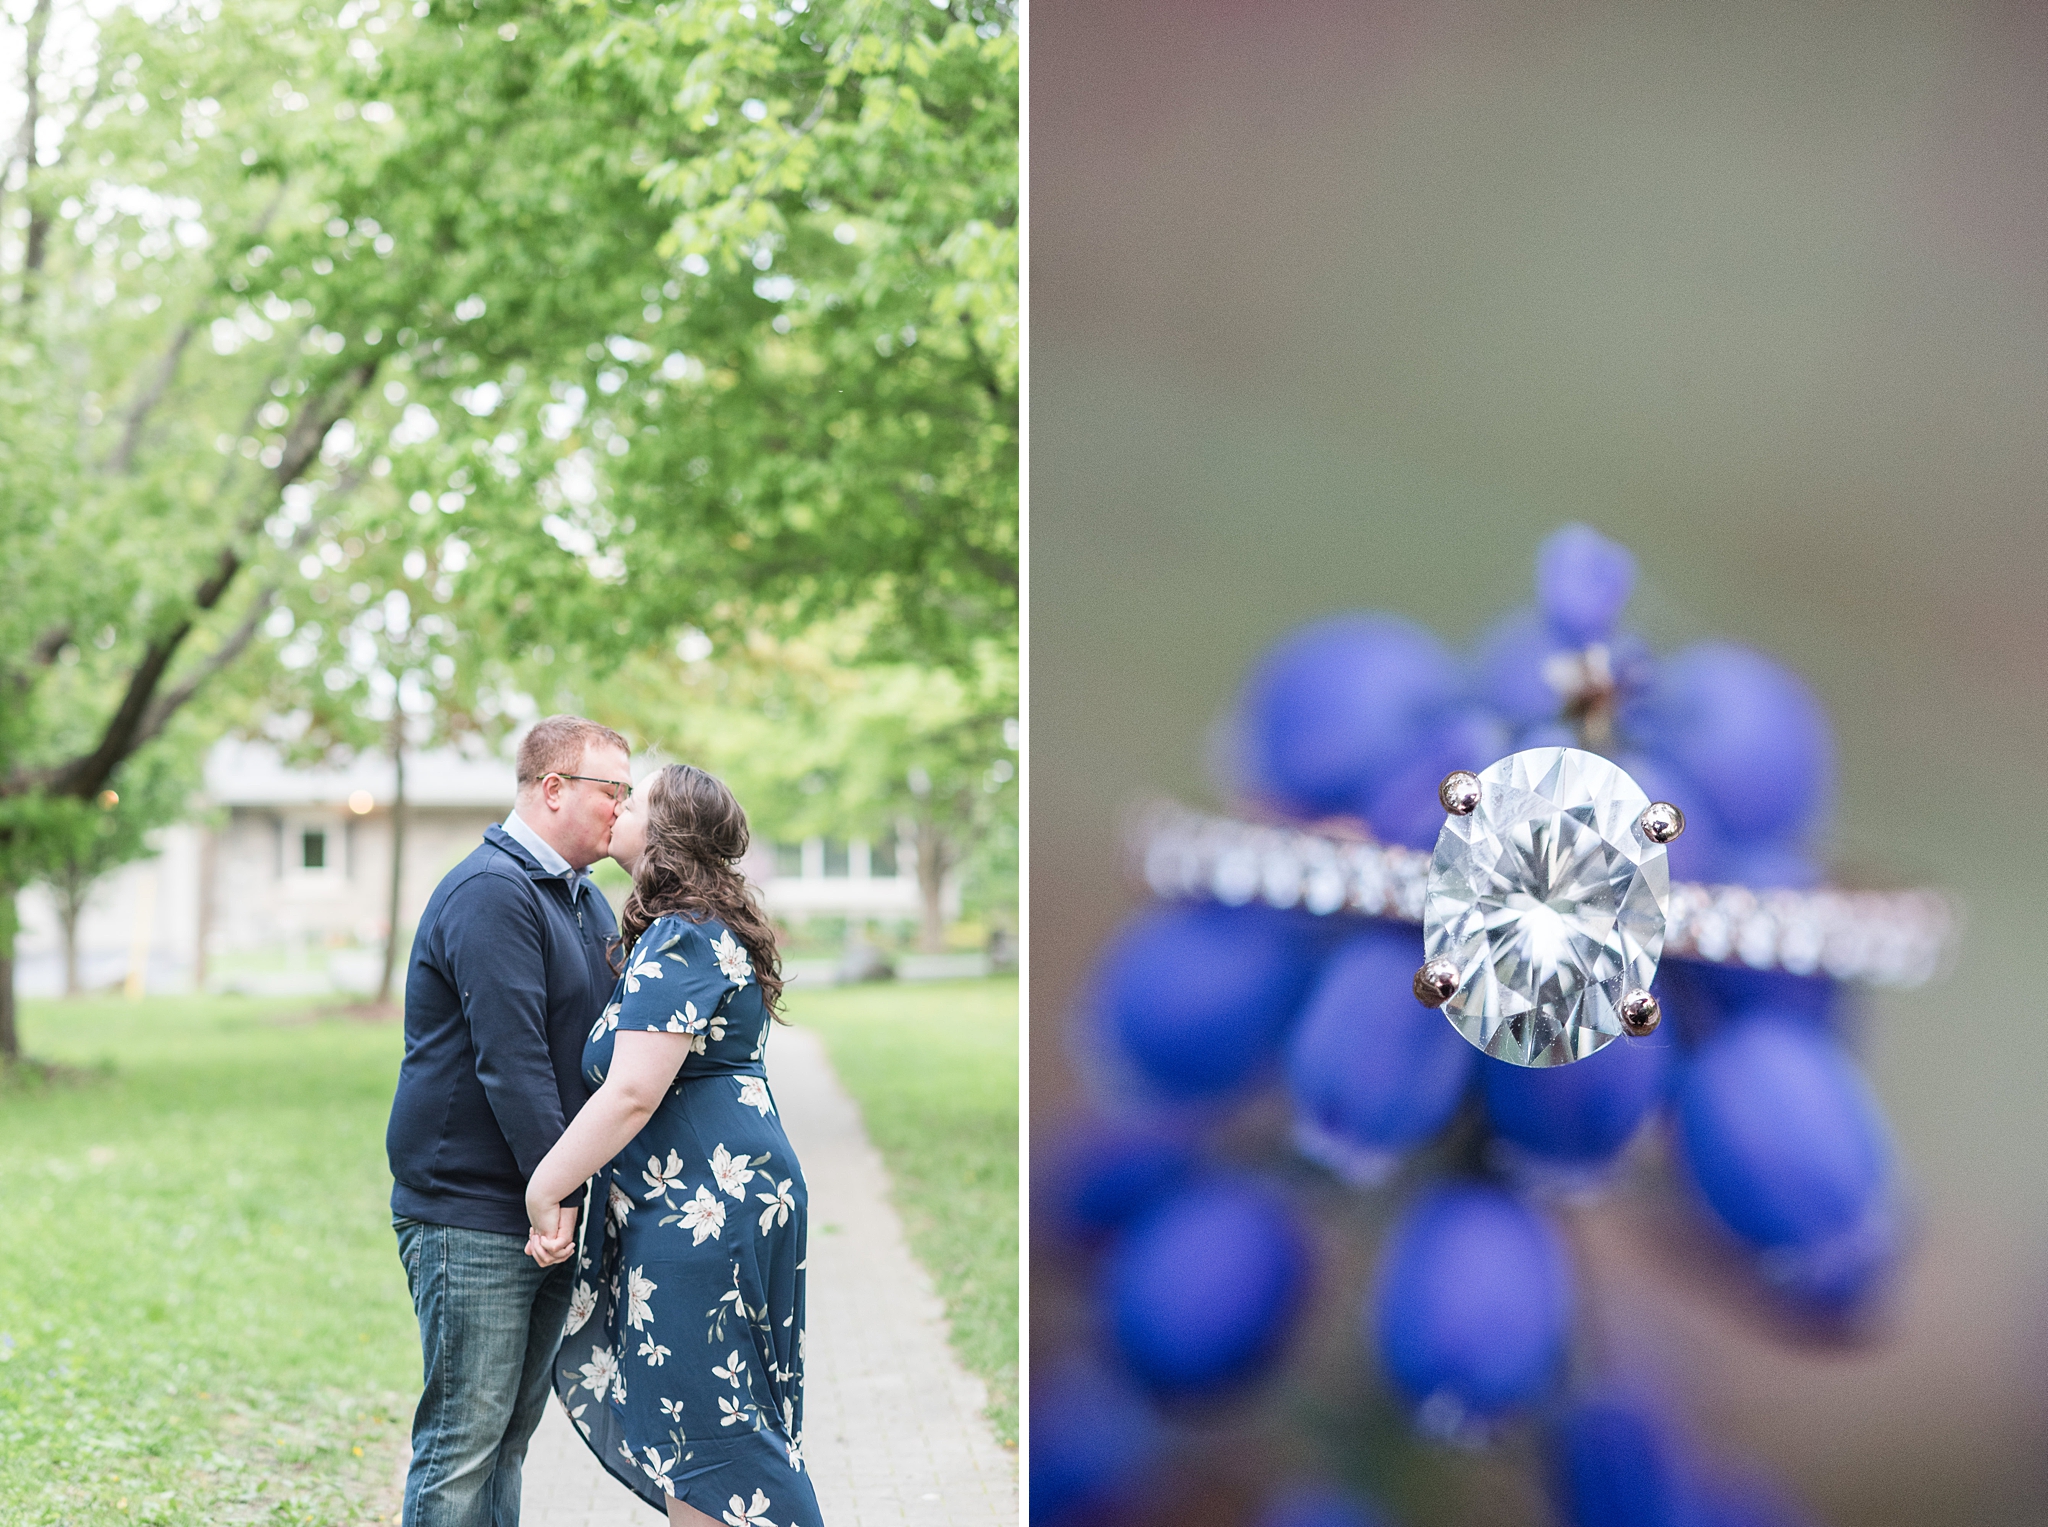 Fun Floral Springtime Engagement | Ottawa Engagement | Engagement photos at Watson’s Mill in Manotick Get more inspiration from this fun springtime engagement session. #ottawawedding #weddingphotography #ottawaweddings